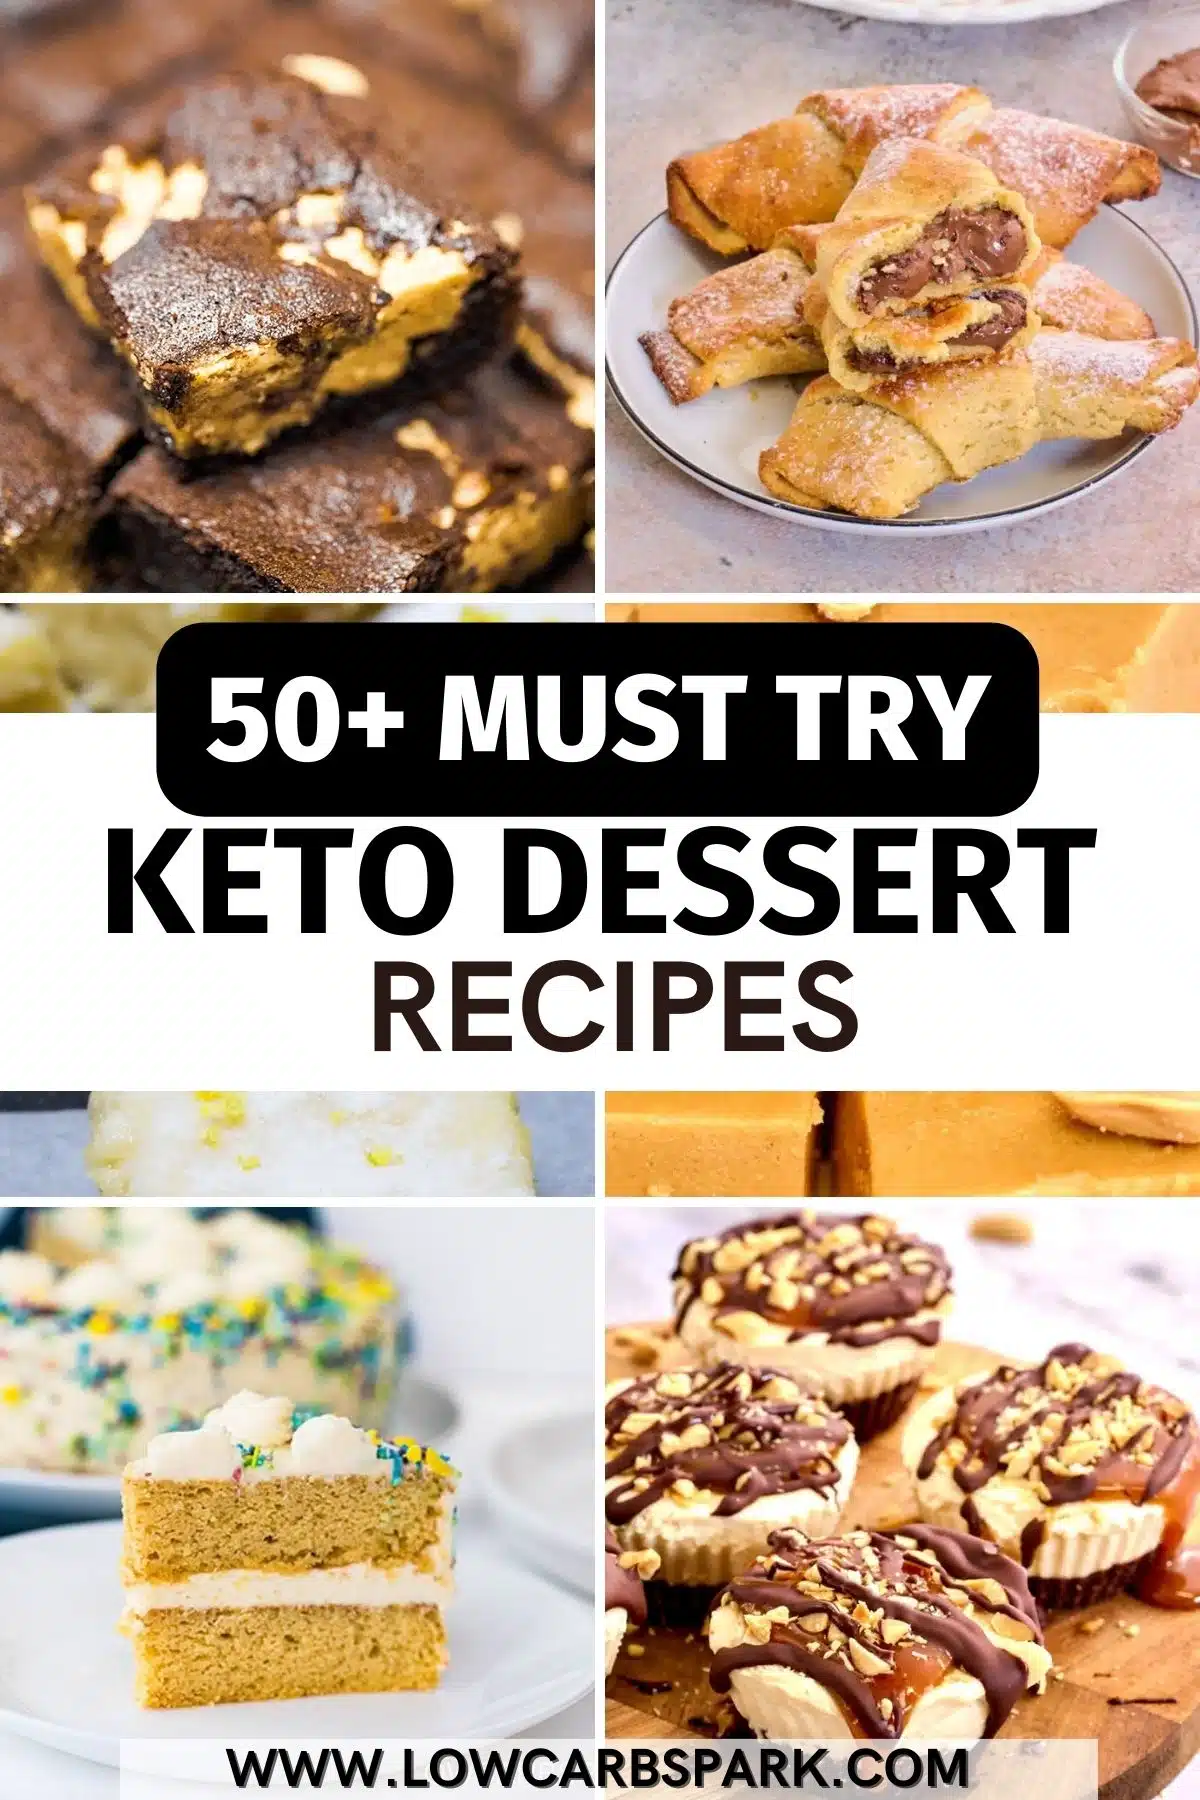 50+ Must Try Keto Desserts Recipes